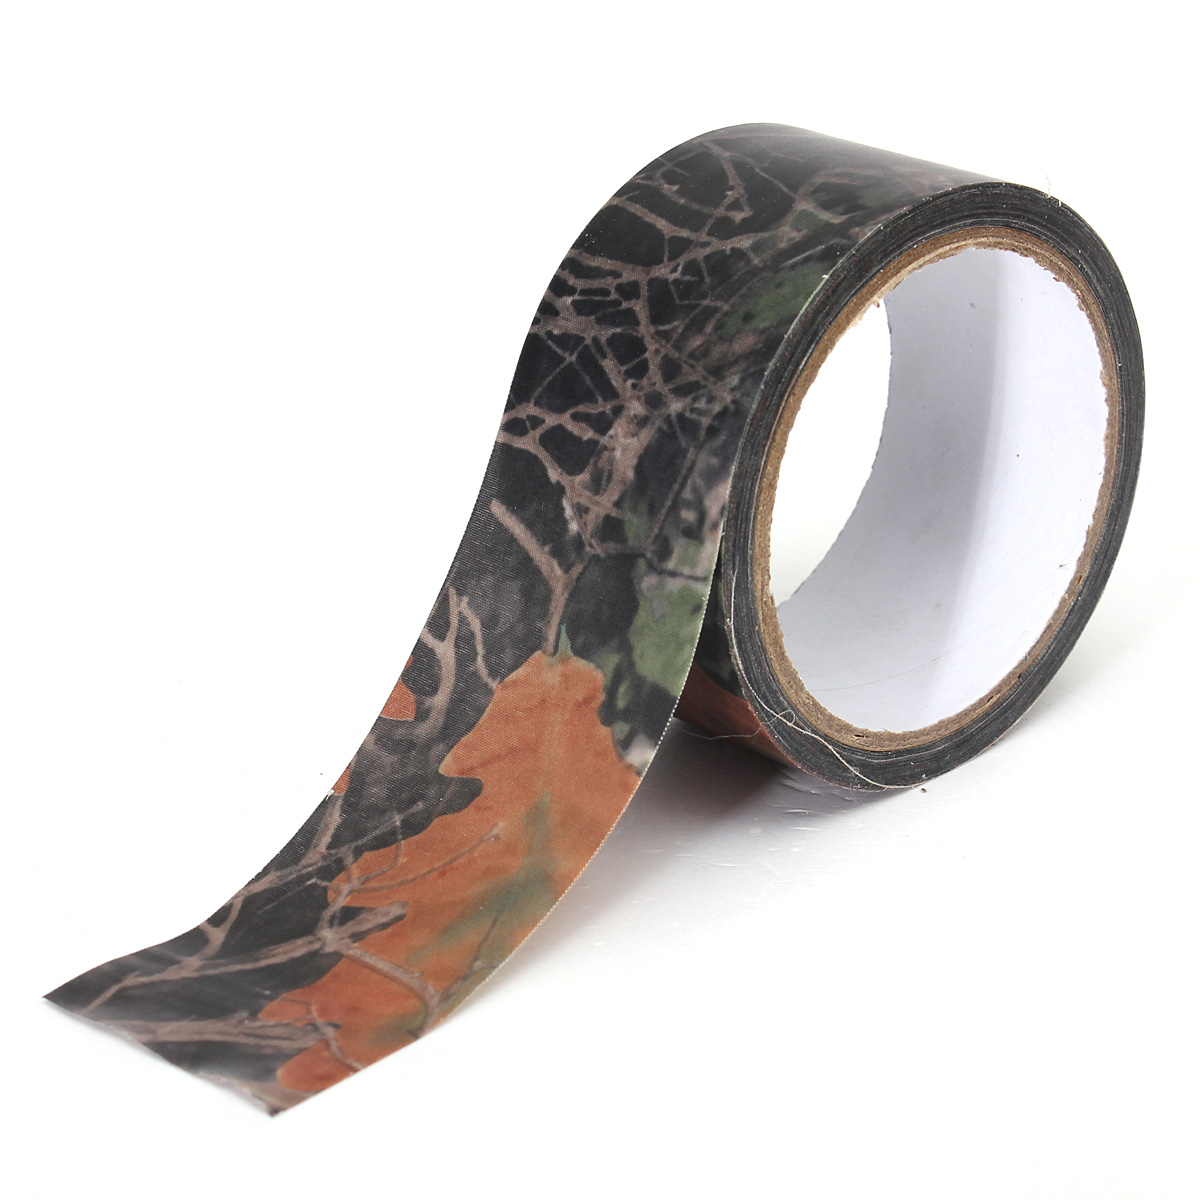 10M-Camouflage-Wrap-Tape-Camo-Tape-Duct-Waterproof-Mutifunctional-Fabric-Camping-Stealth-Tape-1310100-4